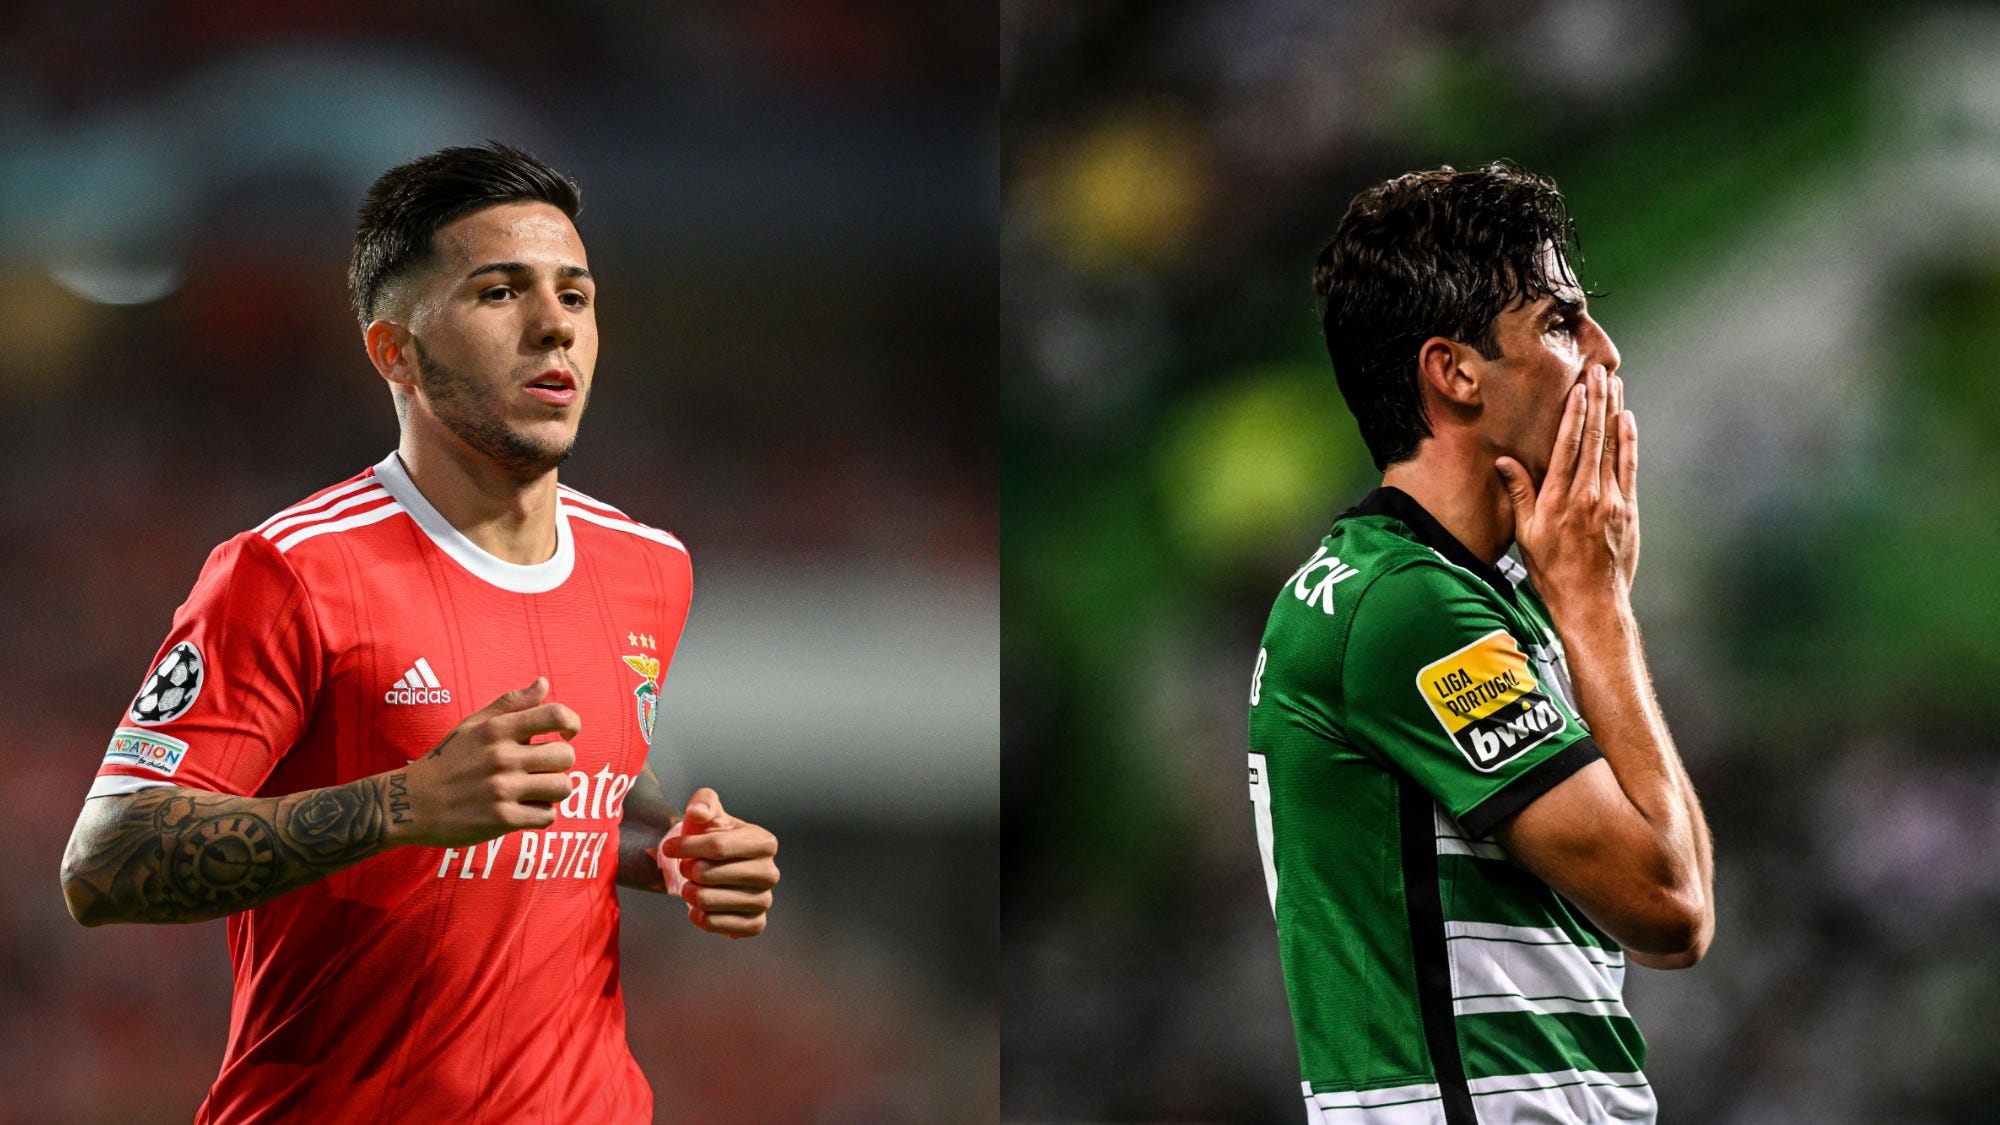 Benfica – Sporting Portugal: all the practical information